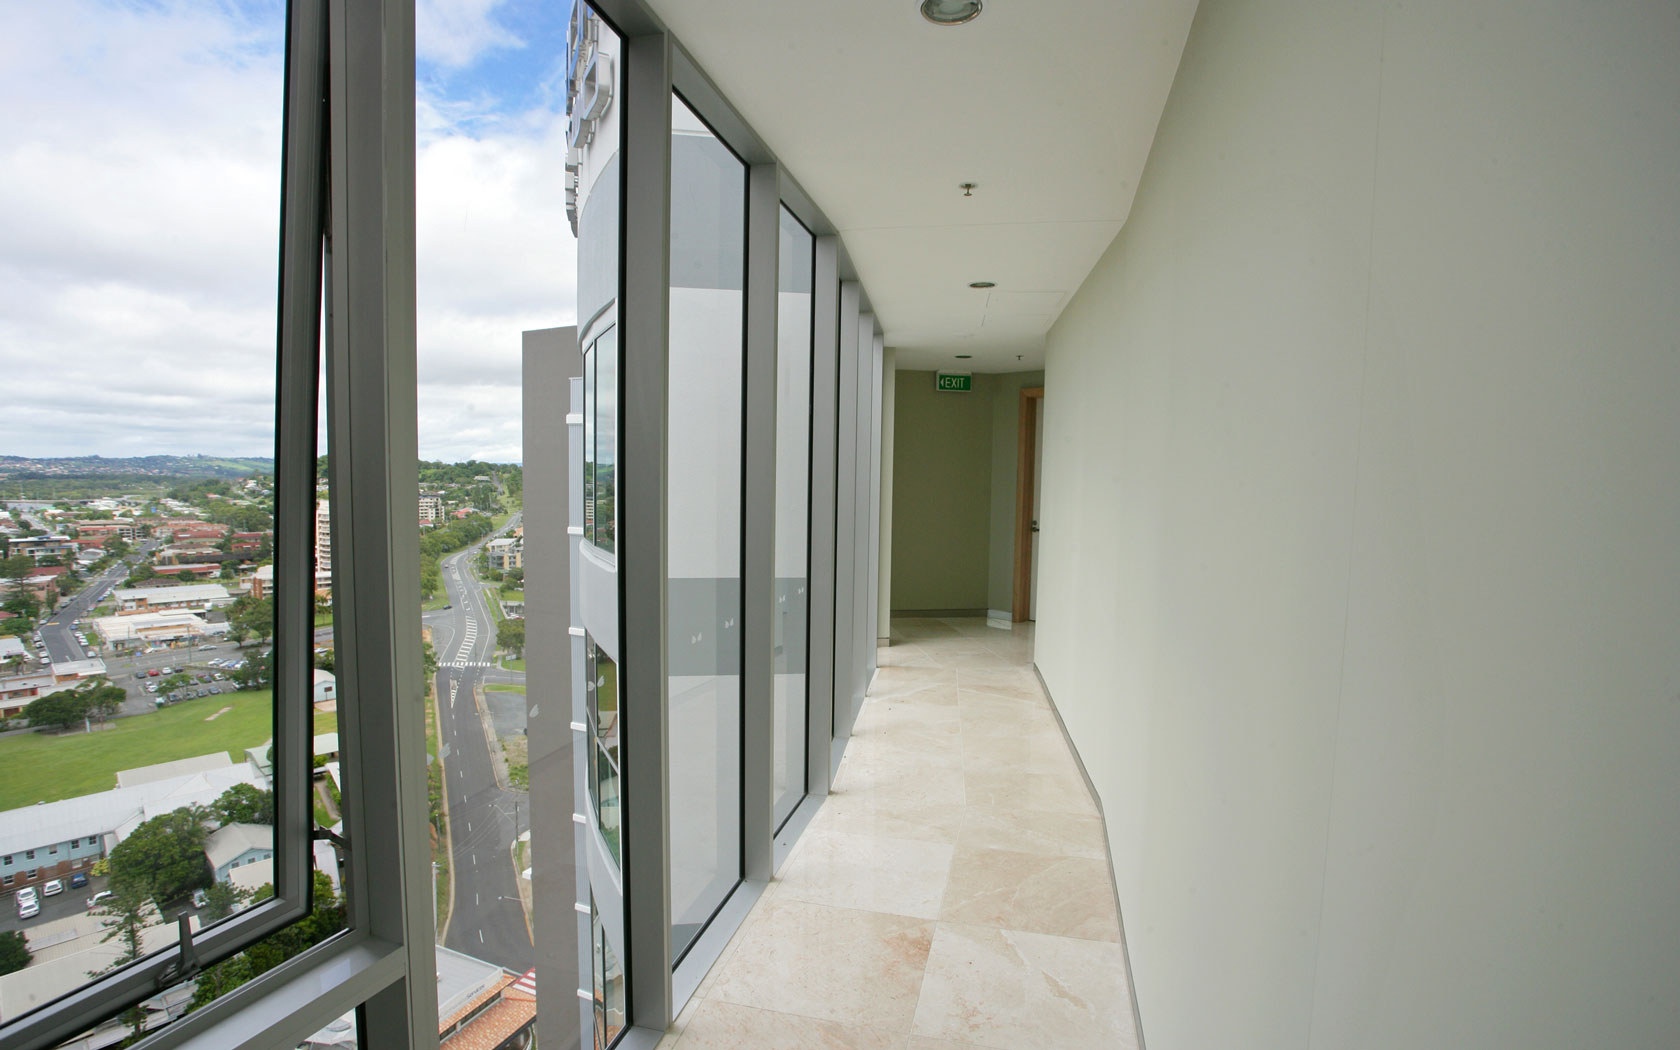 Hallway in a multi-storey apartment complex with floor to ceiling windows on one side.